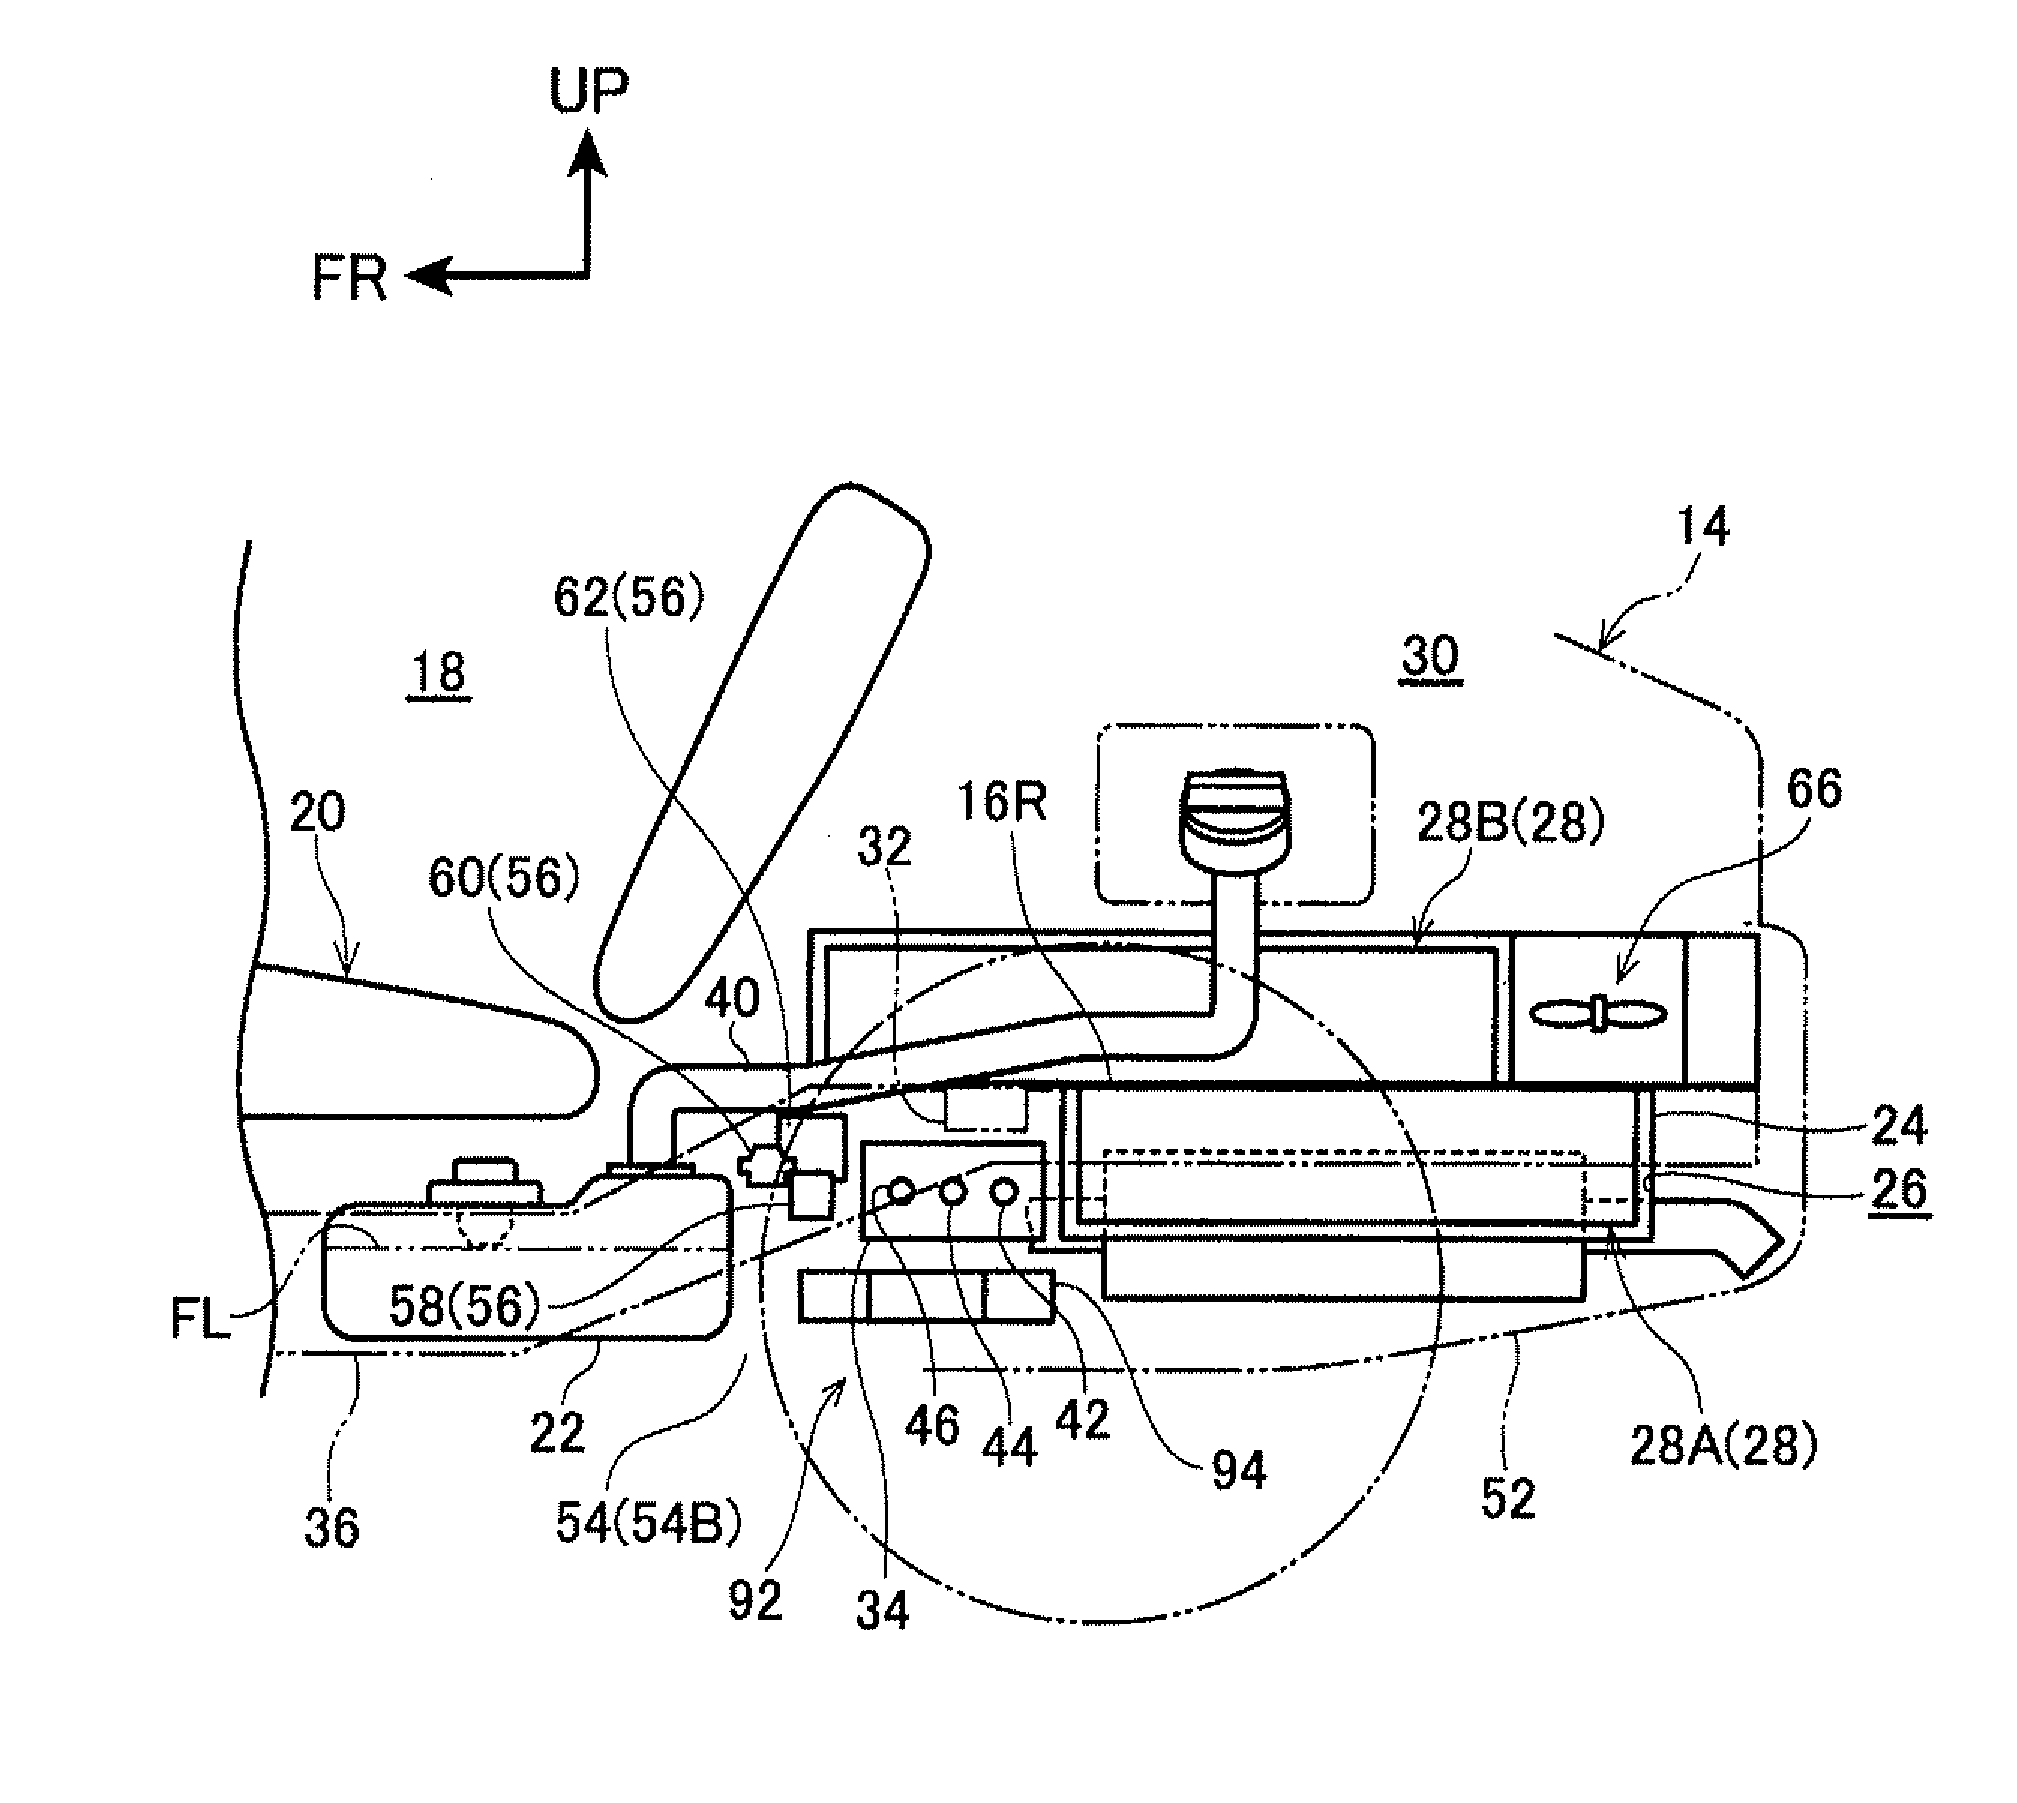 Device for treating evaporated fuel